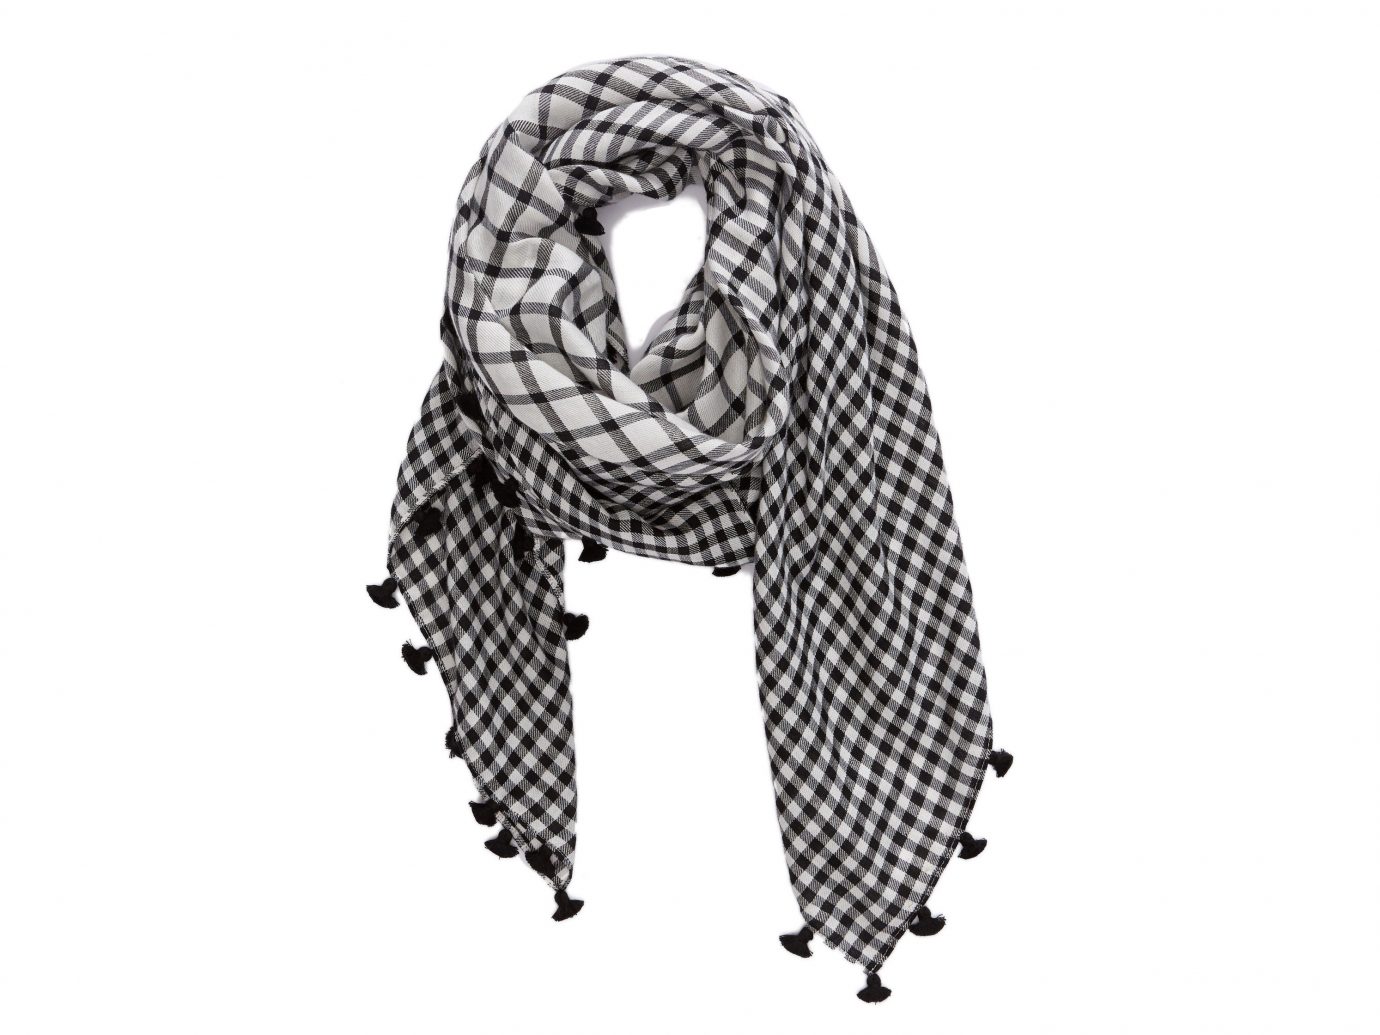 Style + Design Travel Shop scarf stole product product design font pattern neck